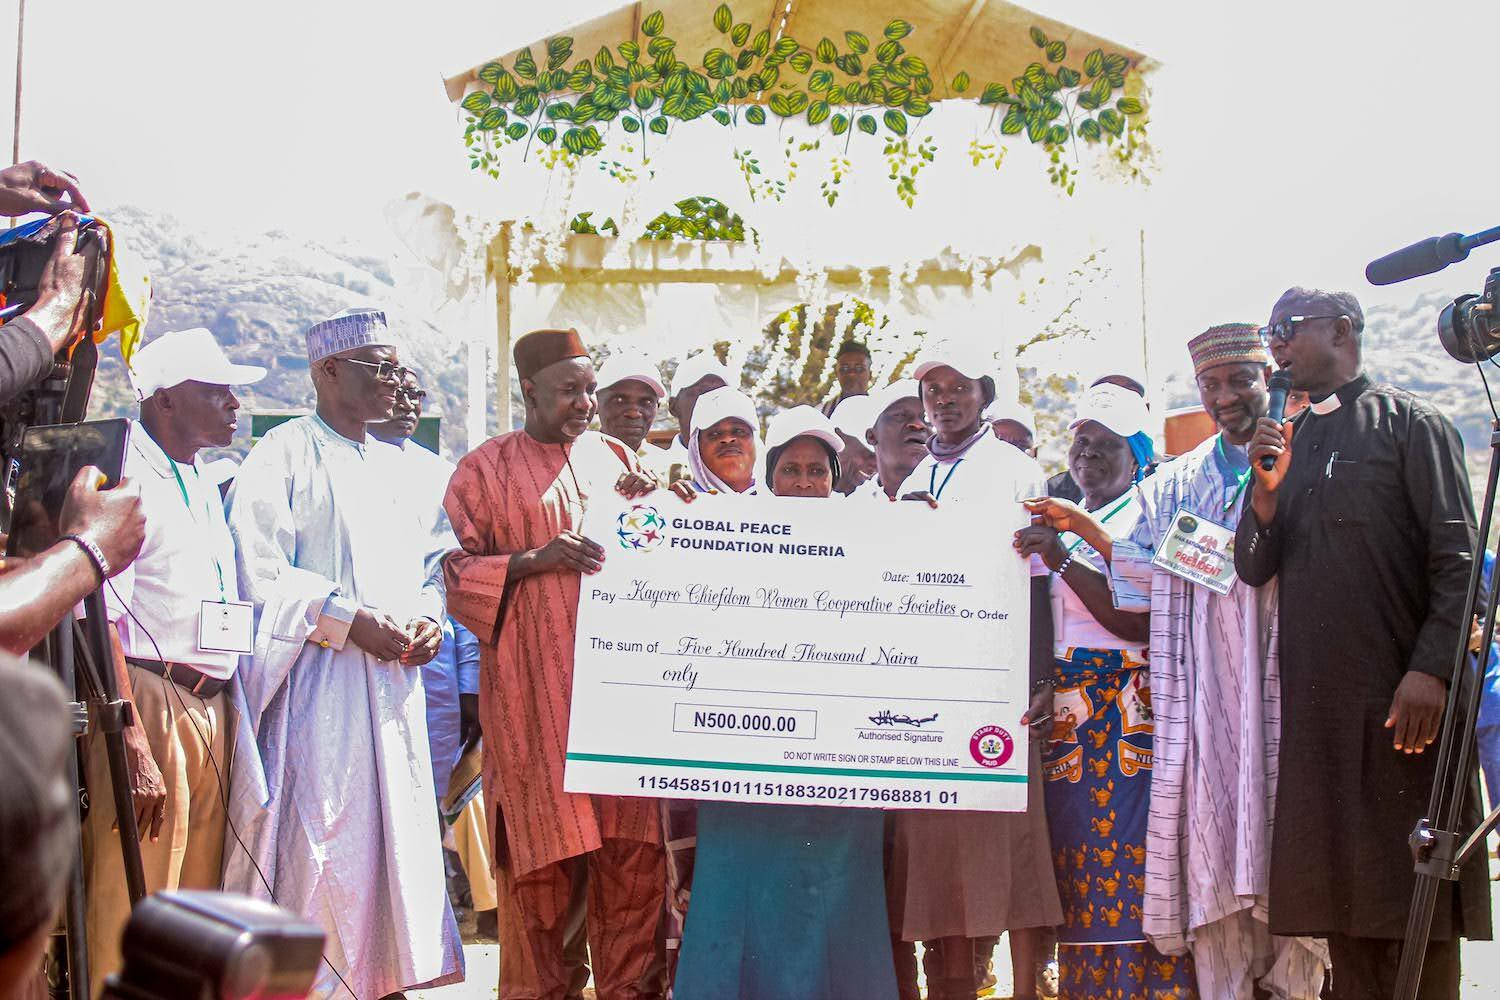 A group of people participating in the Afan Festival in Nigeria, come together to hold a check in front of a camera as a symbol of community peace.